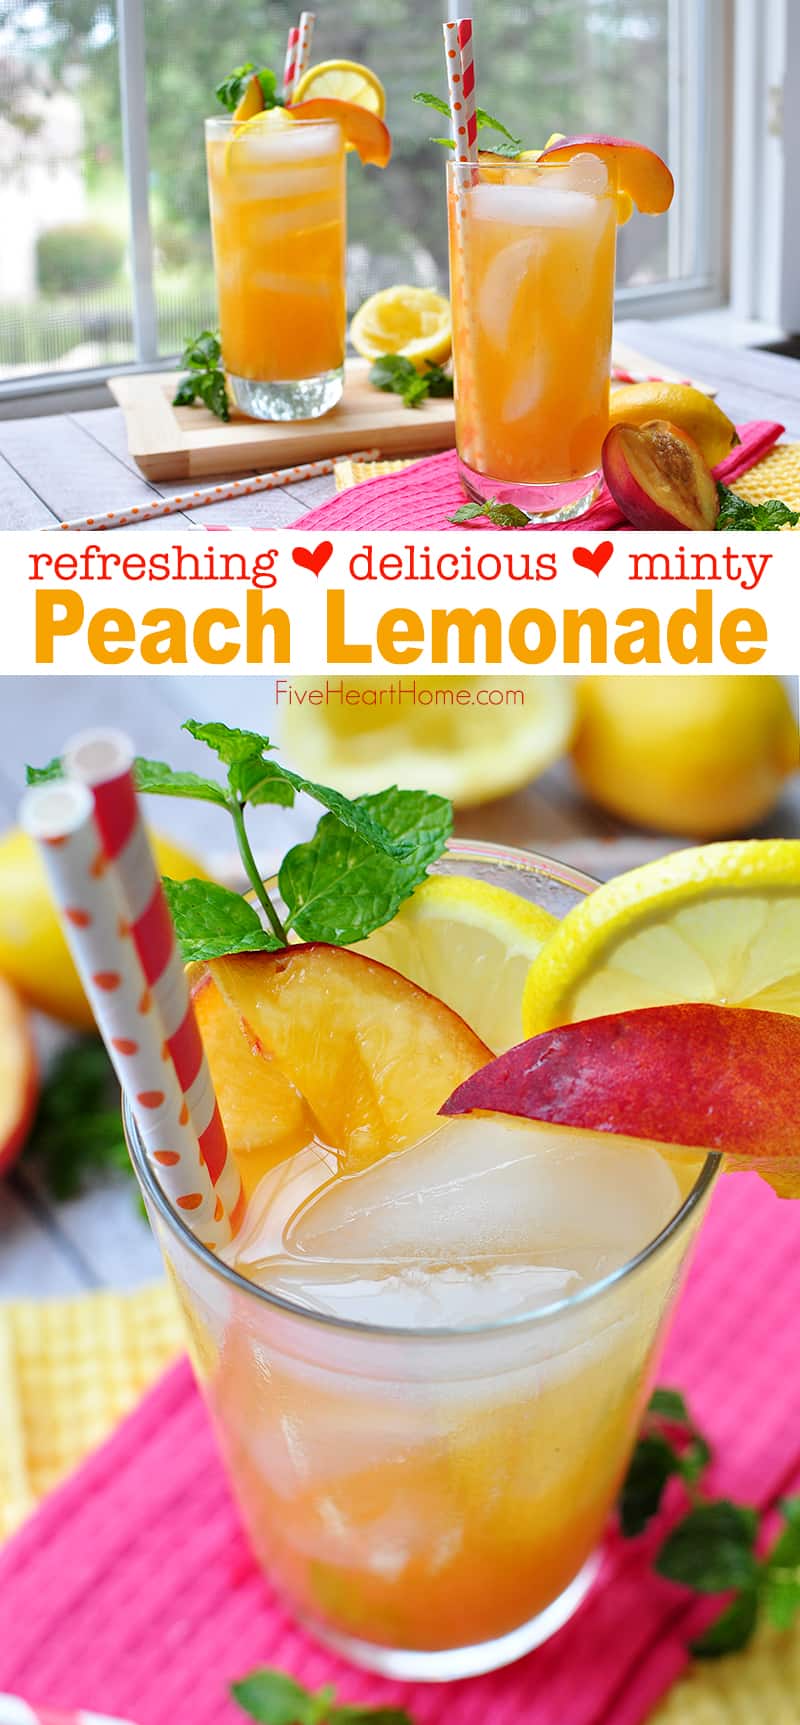 Minty Peach Lemonade ~ a tasty, refreshing drink combining classic homemade lemonade, mint simple syrup, and fresh peach puree…sure to become a new summertime favorite! | FiveHeartHome.com via @fivehearthome